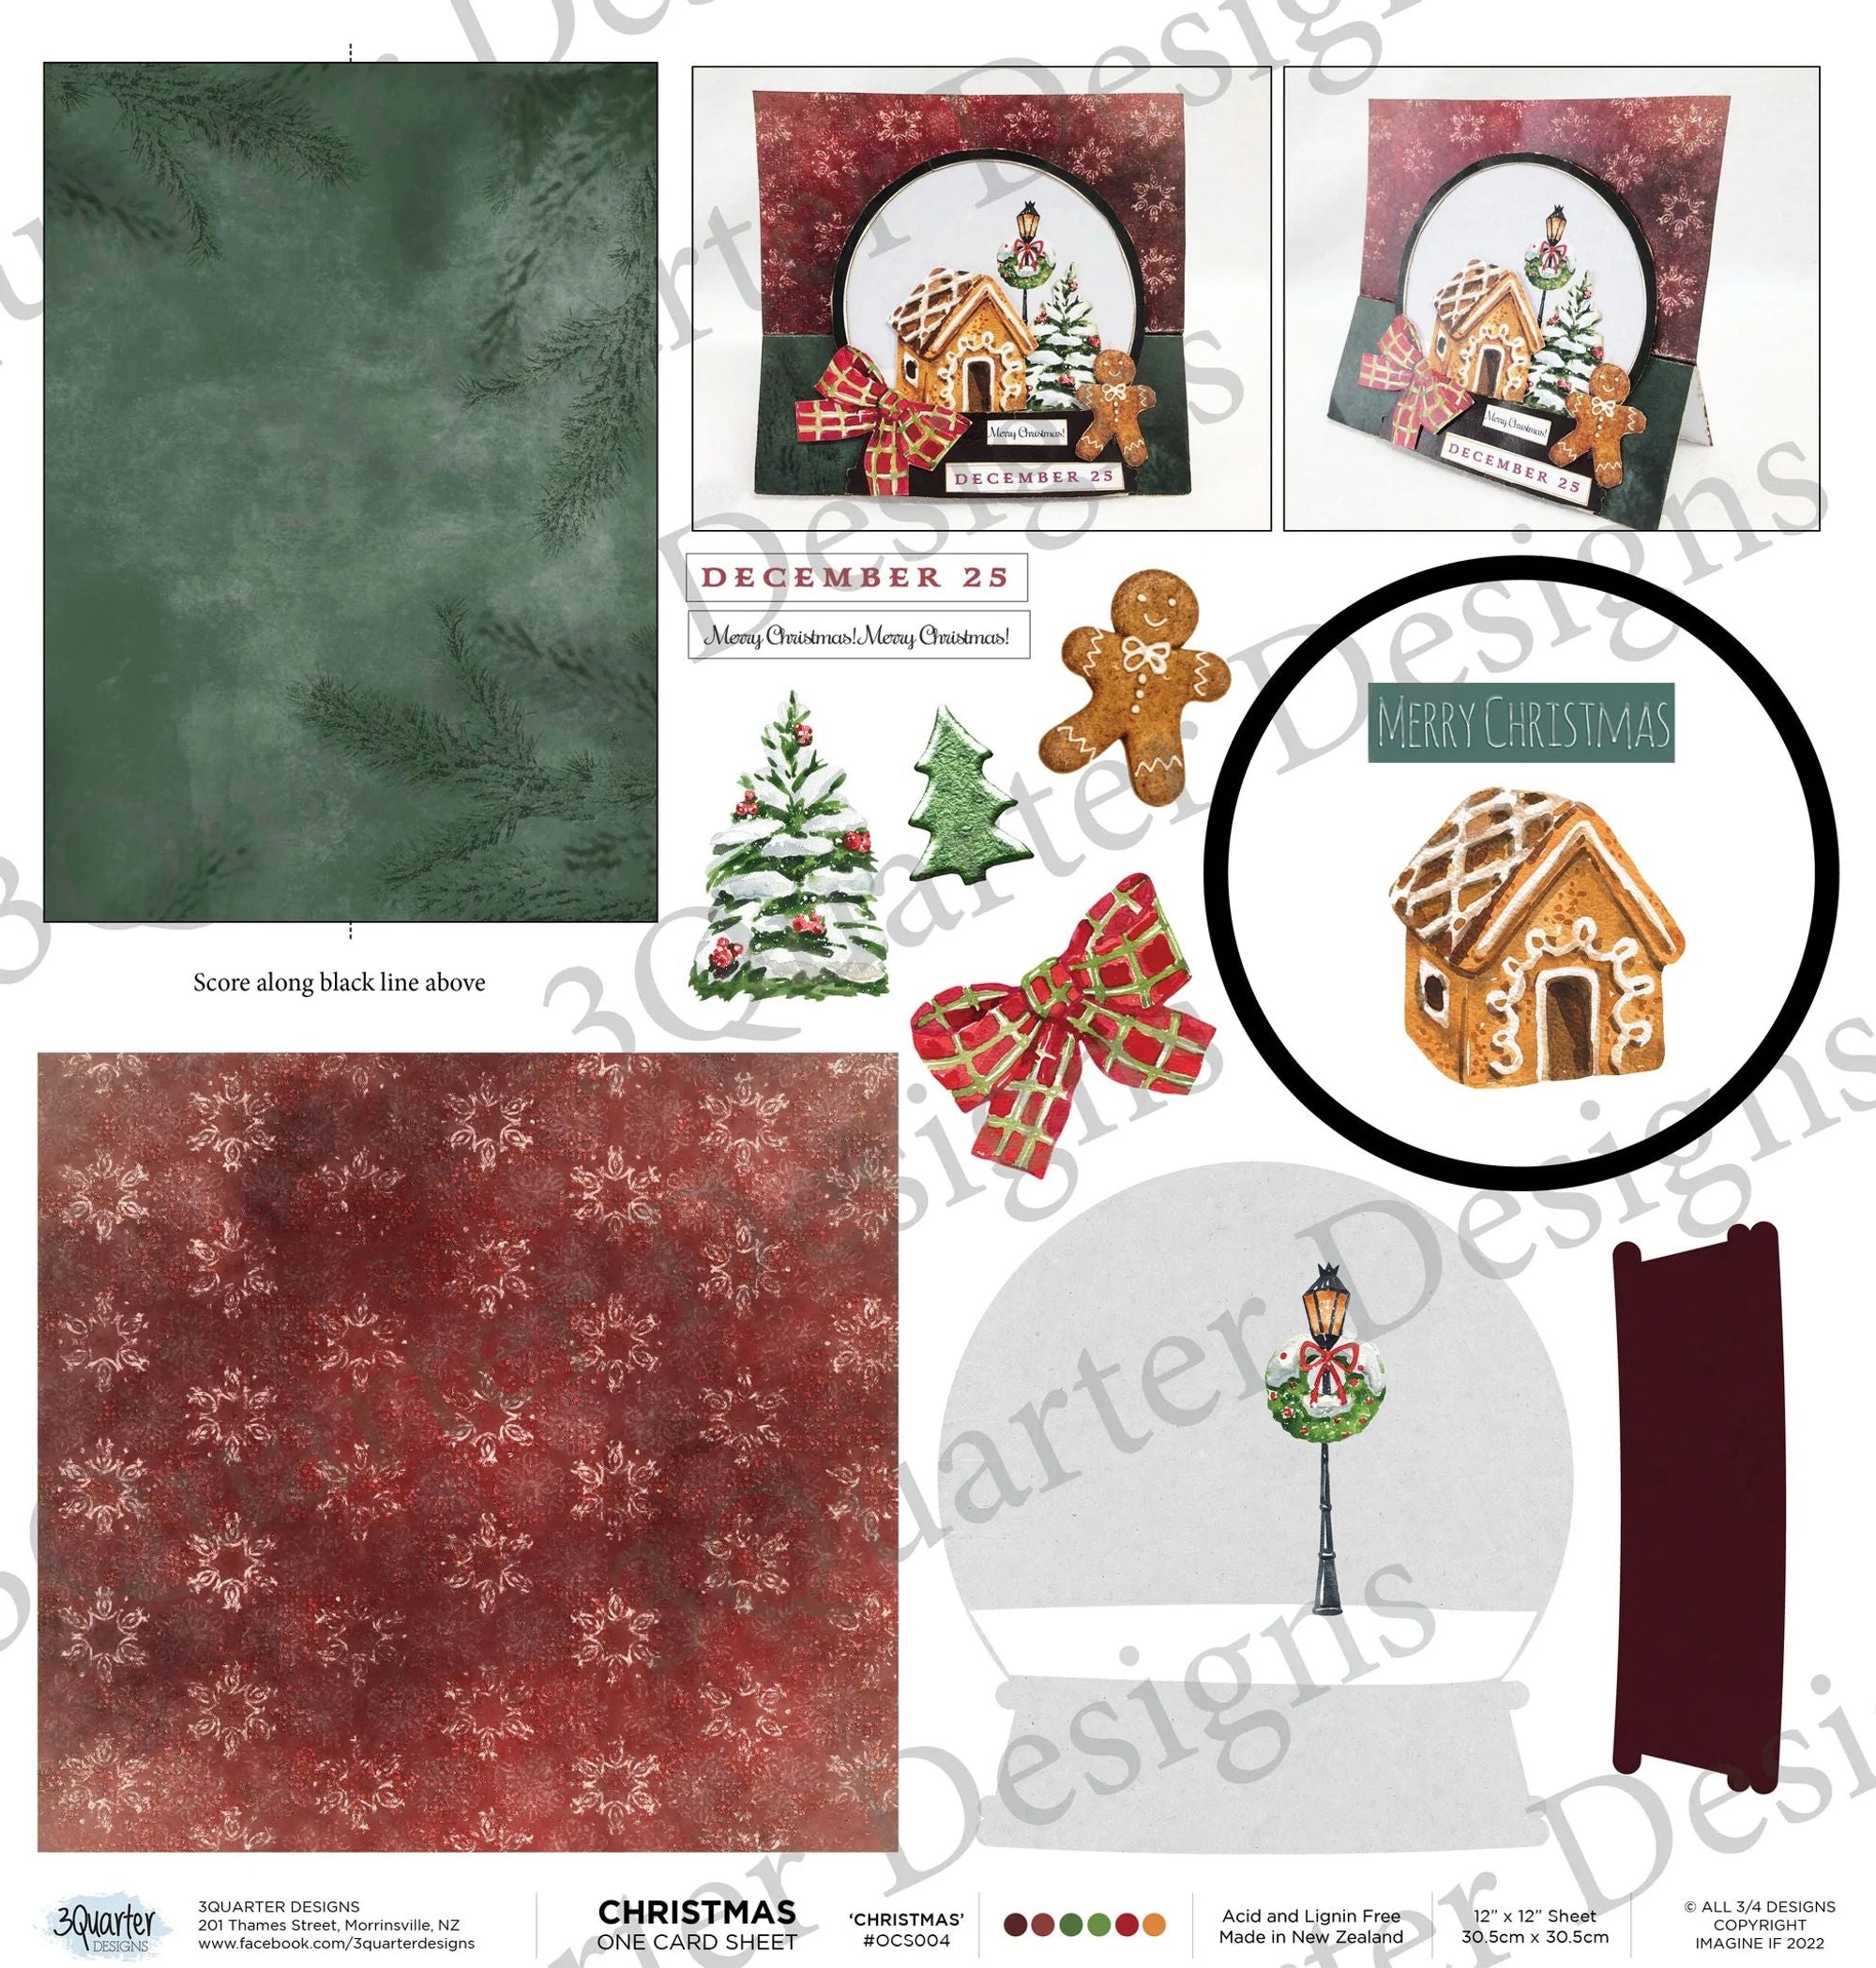 3Quarter Designs - One Card Project Sheet - Christmas